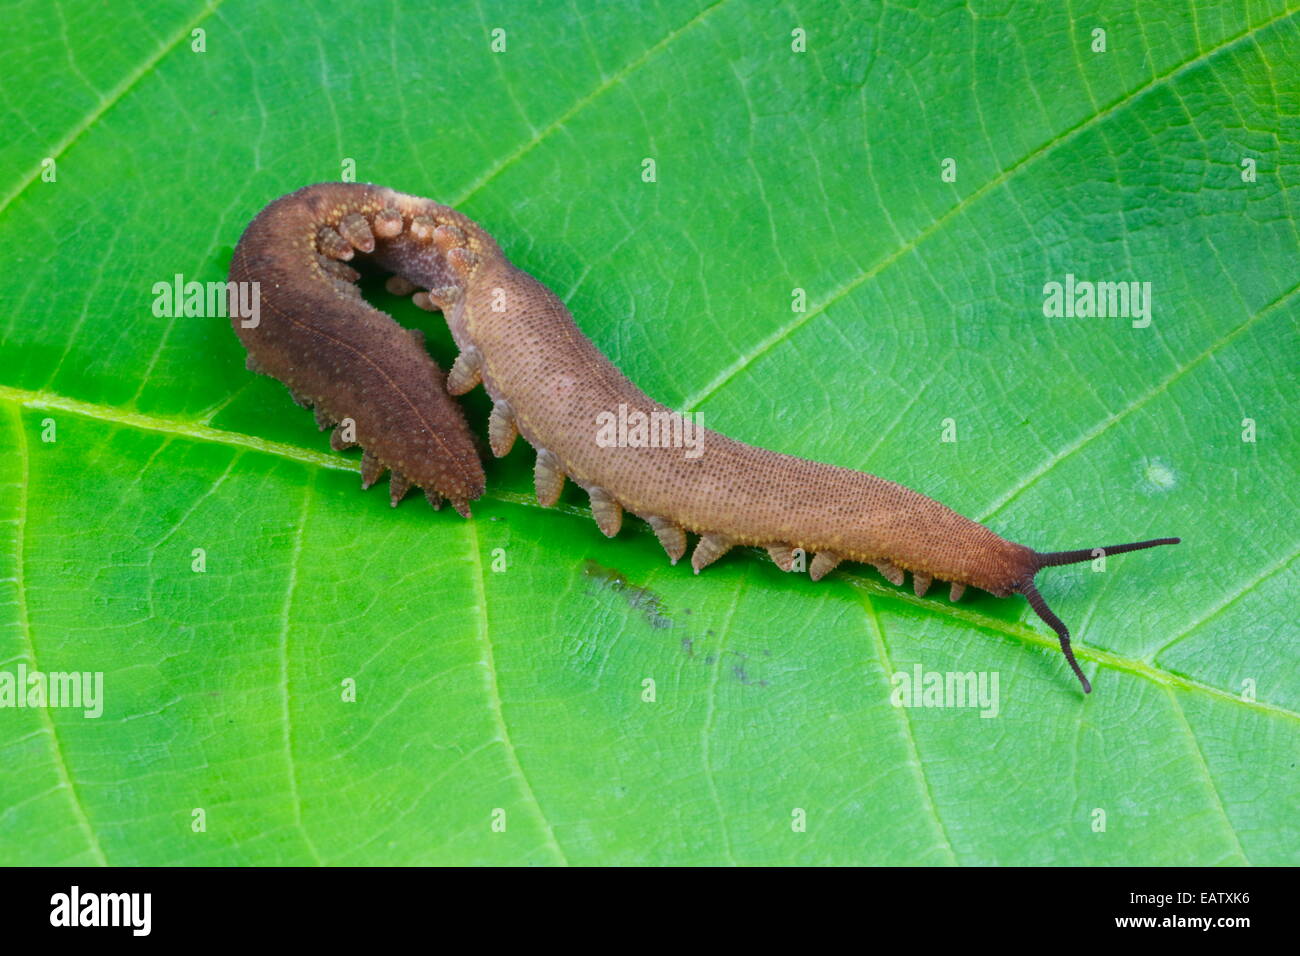 A velvet worm, Peripatidae family, crawling on a leaf. Stock Photo